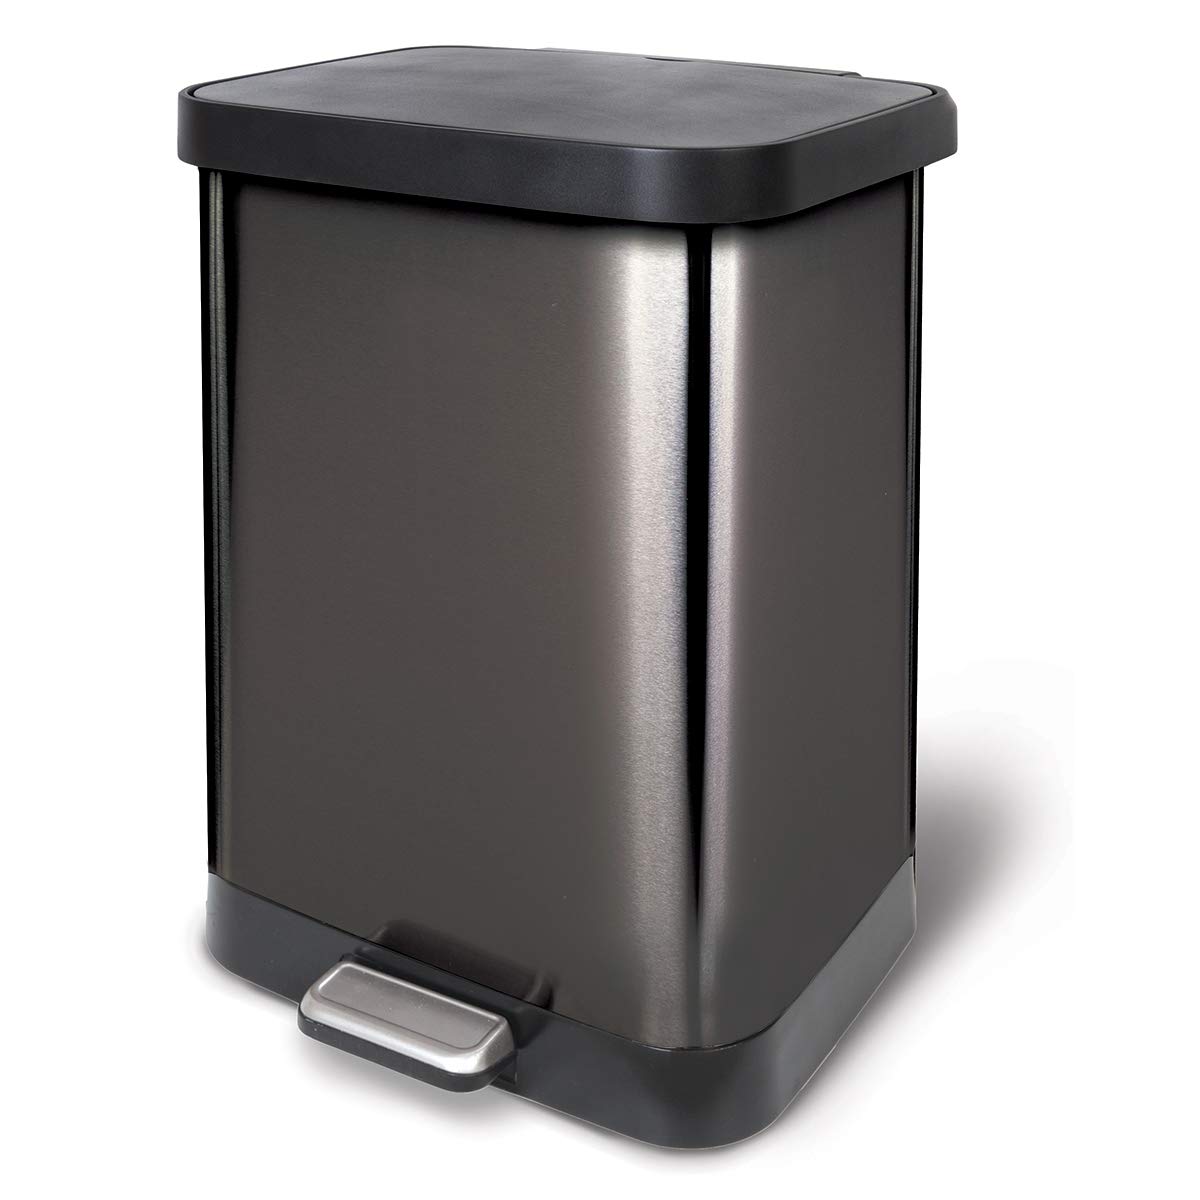 https://bigbigmart.com/wp-content/uploads/2023/05/Glad-Stainless-Steel-Step-Trash-Can-with-Odor-Protection-Large-Metal-Kitchen-Garbage-Bin-with-Soft-Close-Lid-Foot-Pedal-and-Waste-Bag-Roll-Holder-13-Gallon-Pewter.jpg